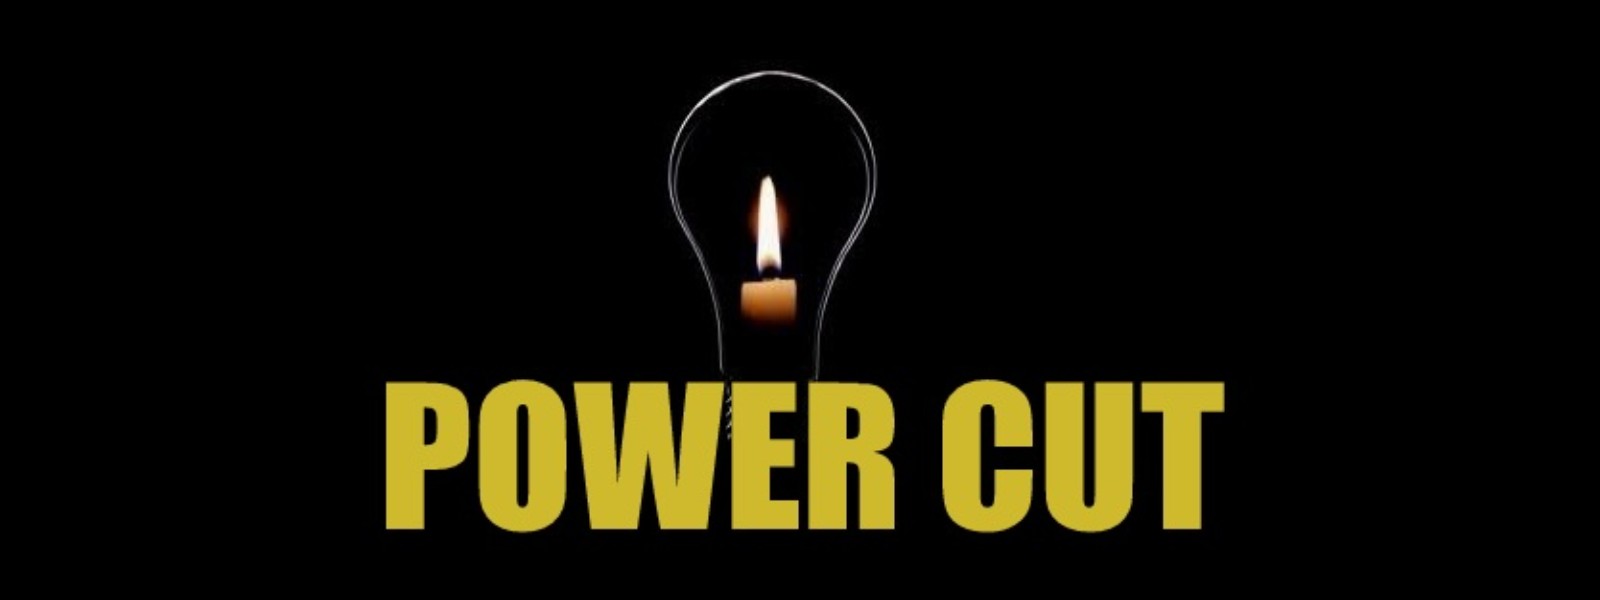 Power Cut for multiple areas; Supply to be restored by 9 PM